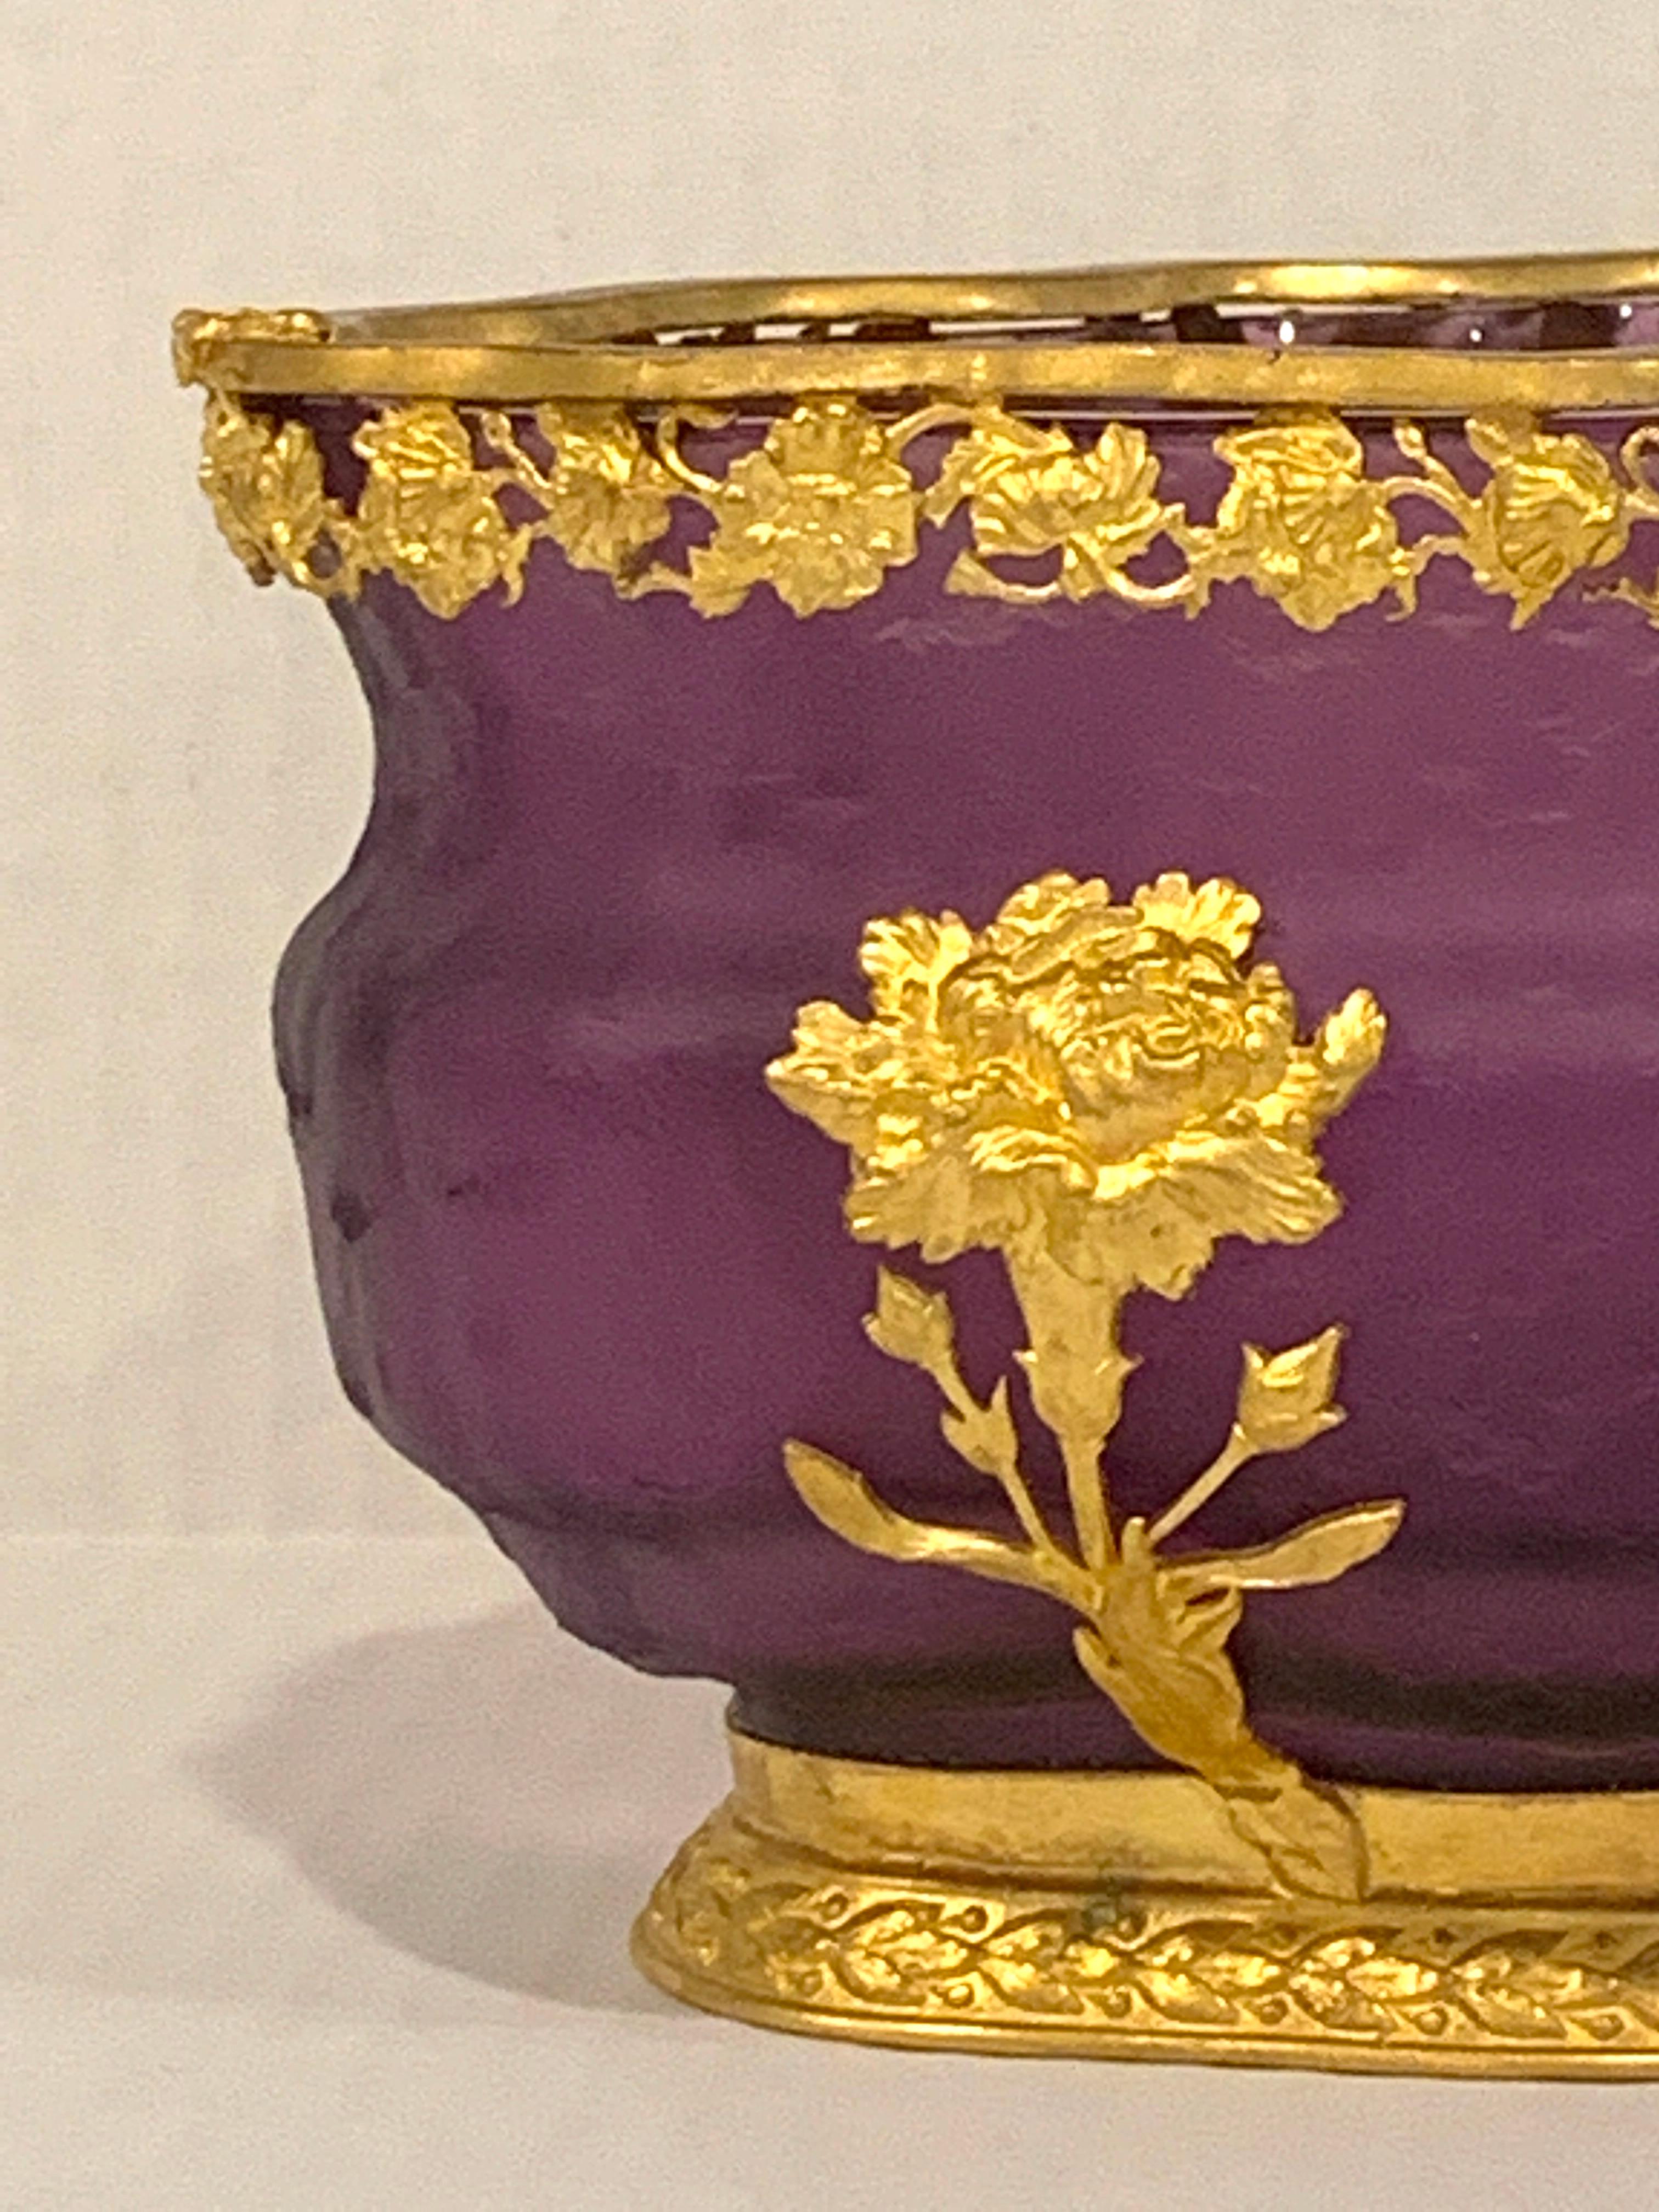 Ormolu-mounted Baccarat amethyst chipped ice centerpiece, of oval form with floral ormolu mounts, interior measures 8.5